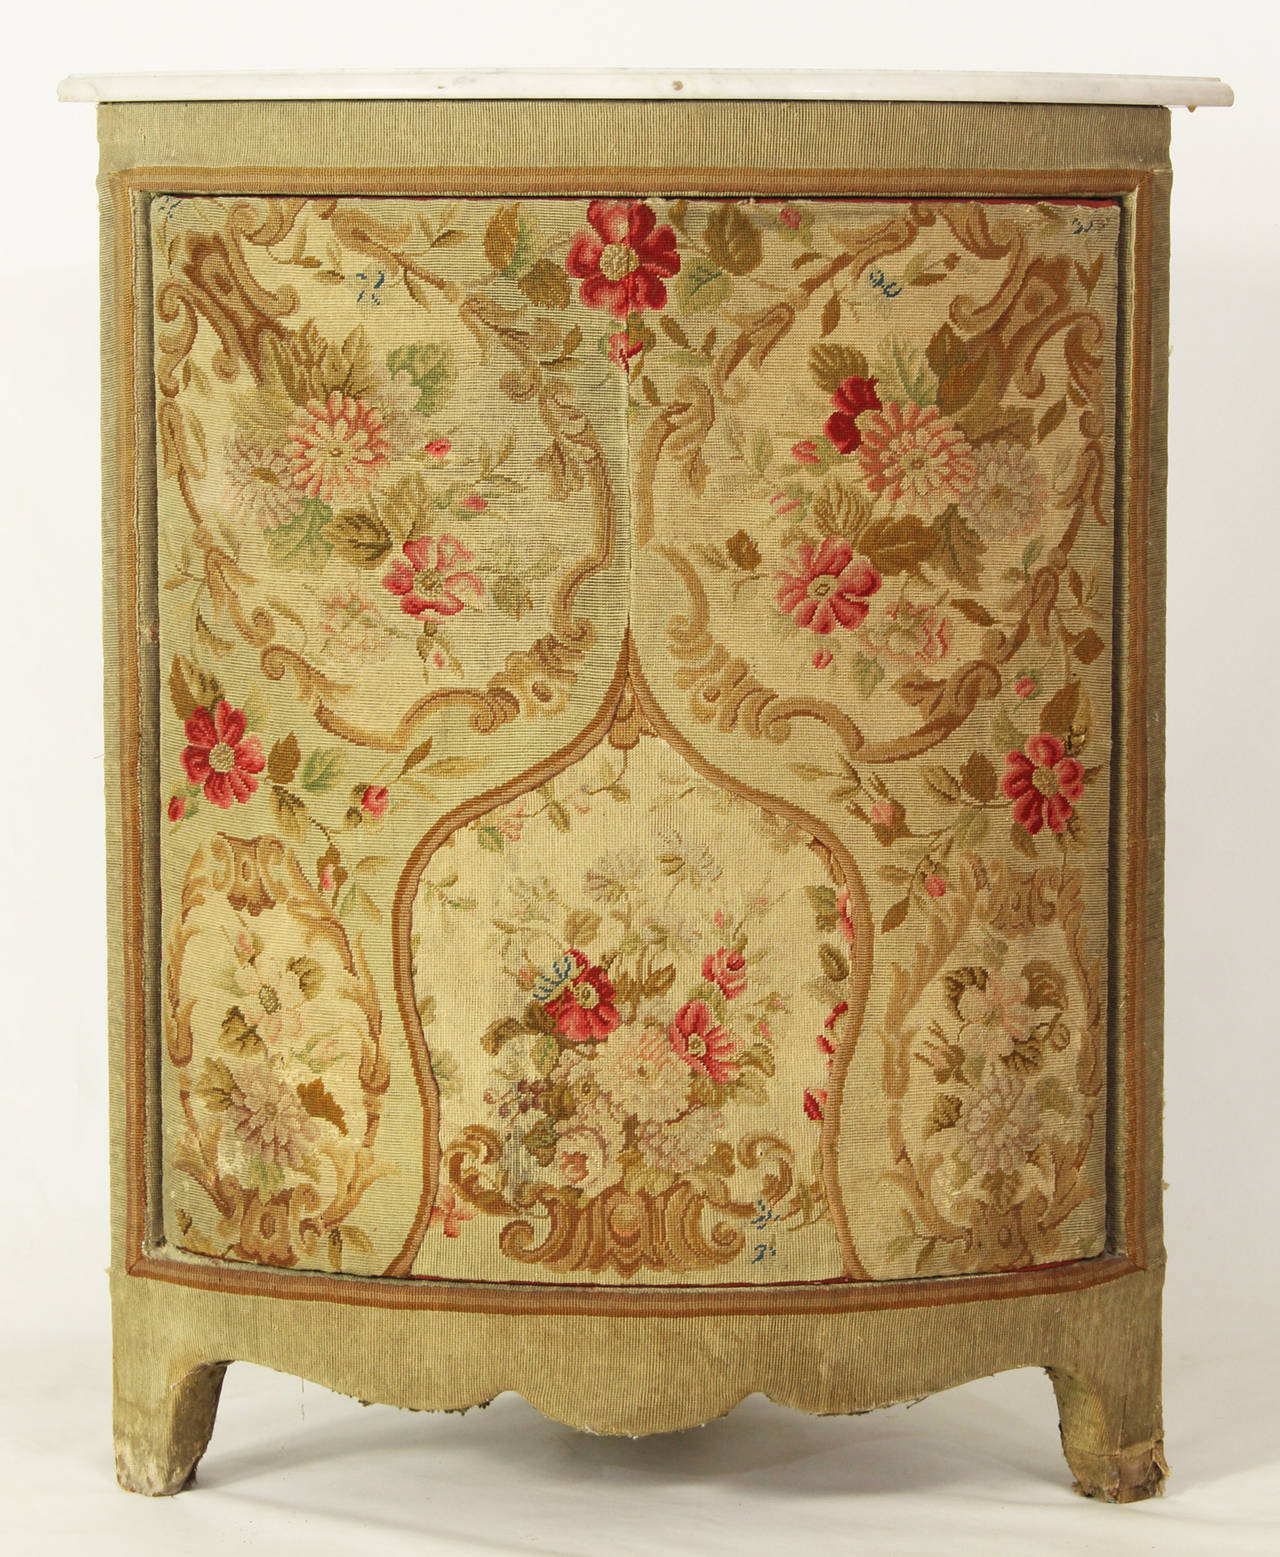 A mid 19th century French floral tapestry bowfront corner cabinet with original pale grey marble top